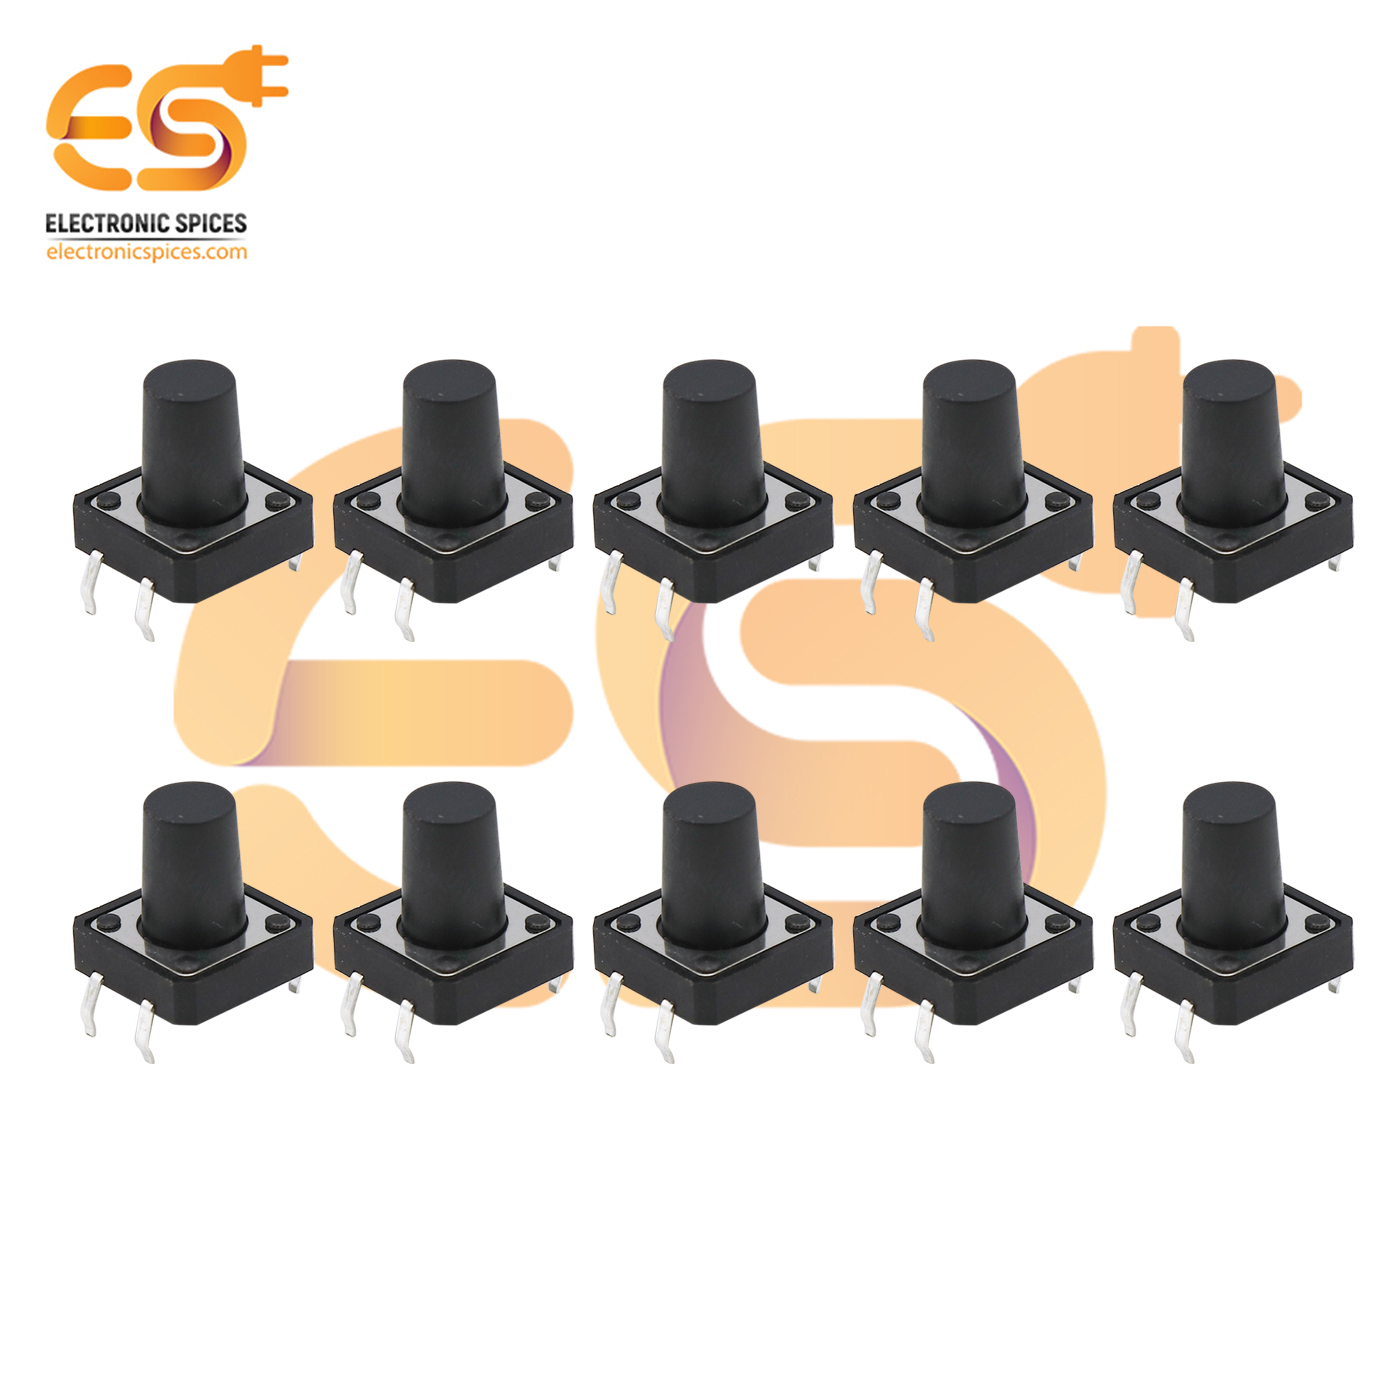 12 x 12 x 13mm Black color tactile momentary push button switch